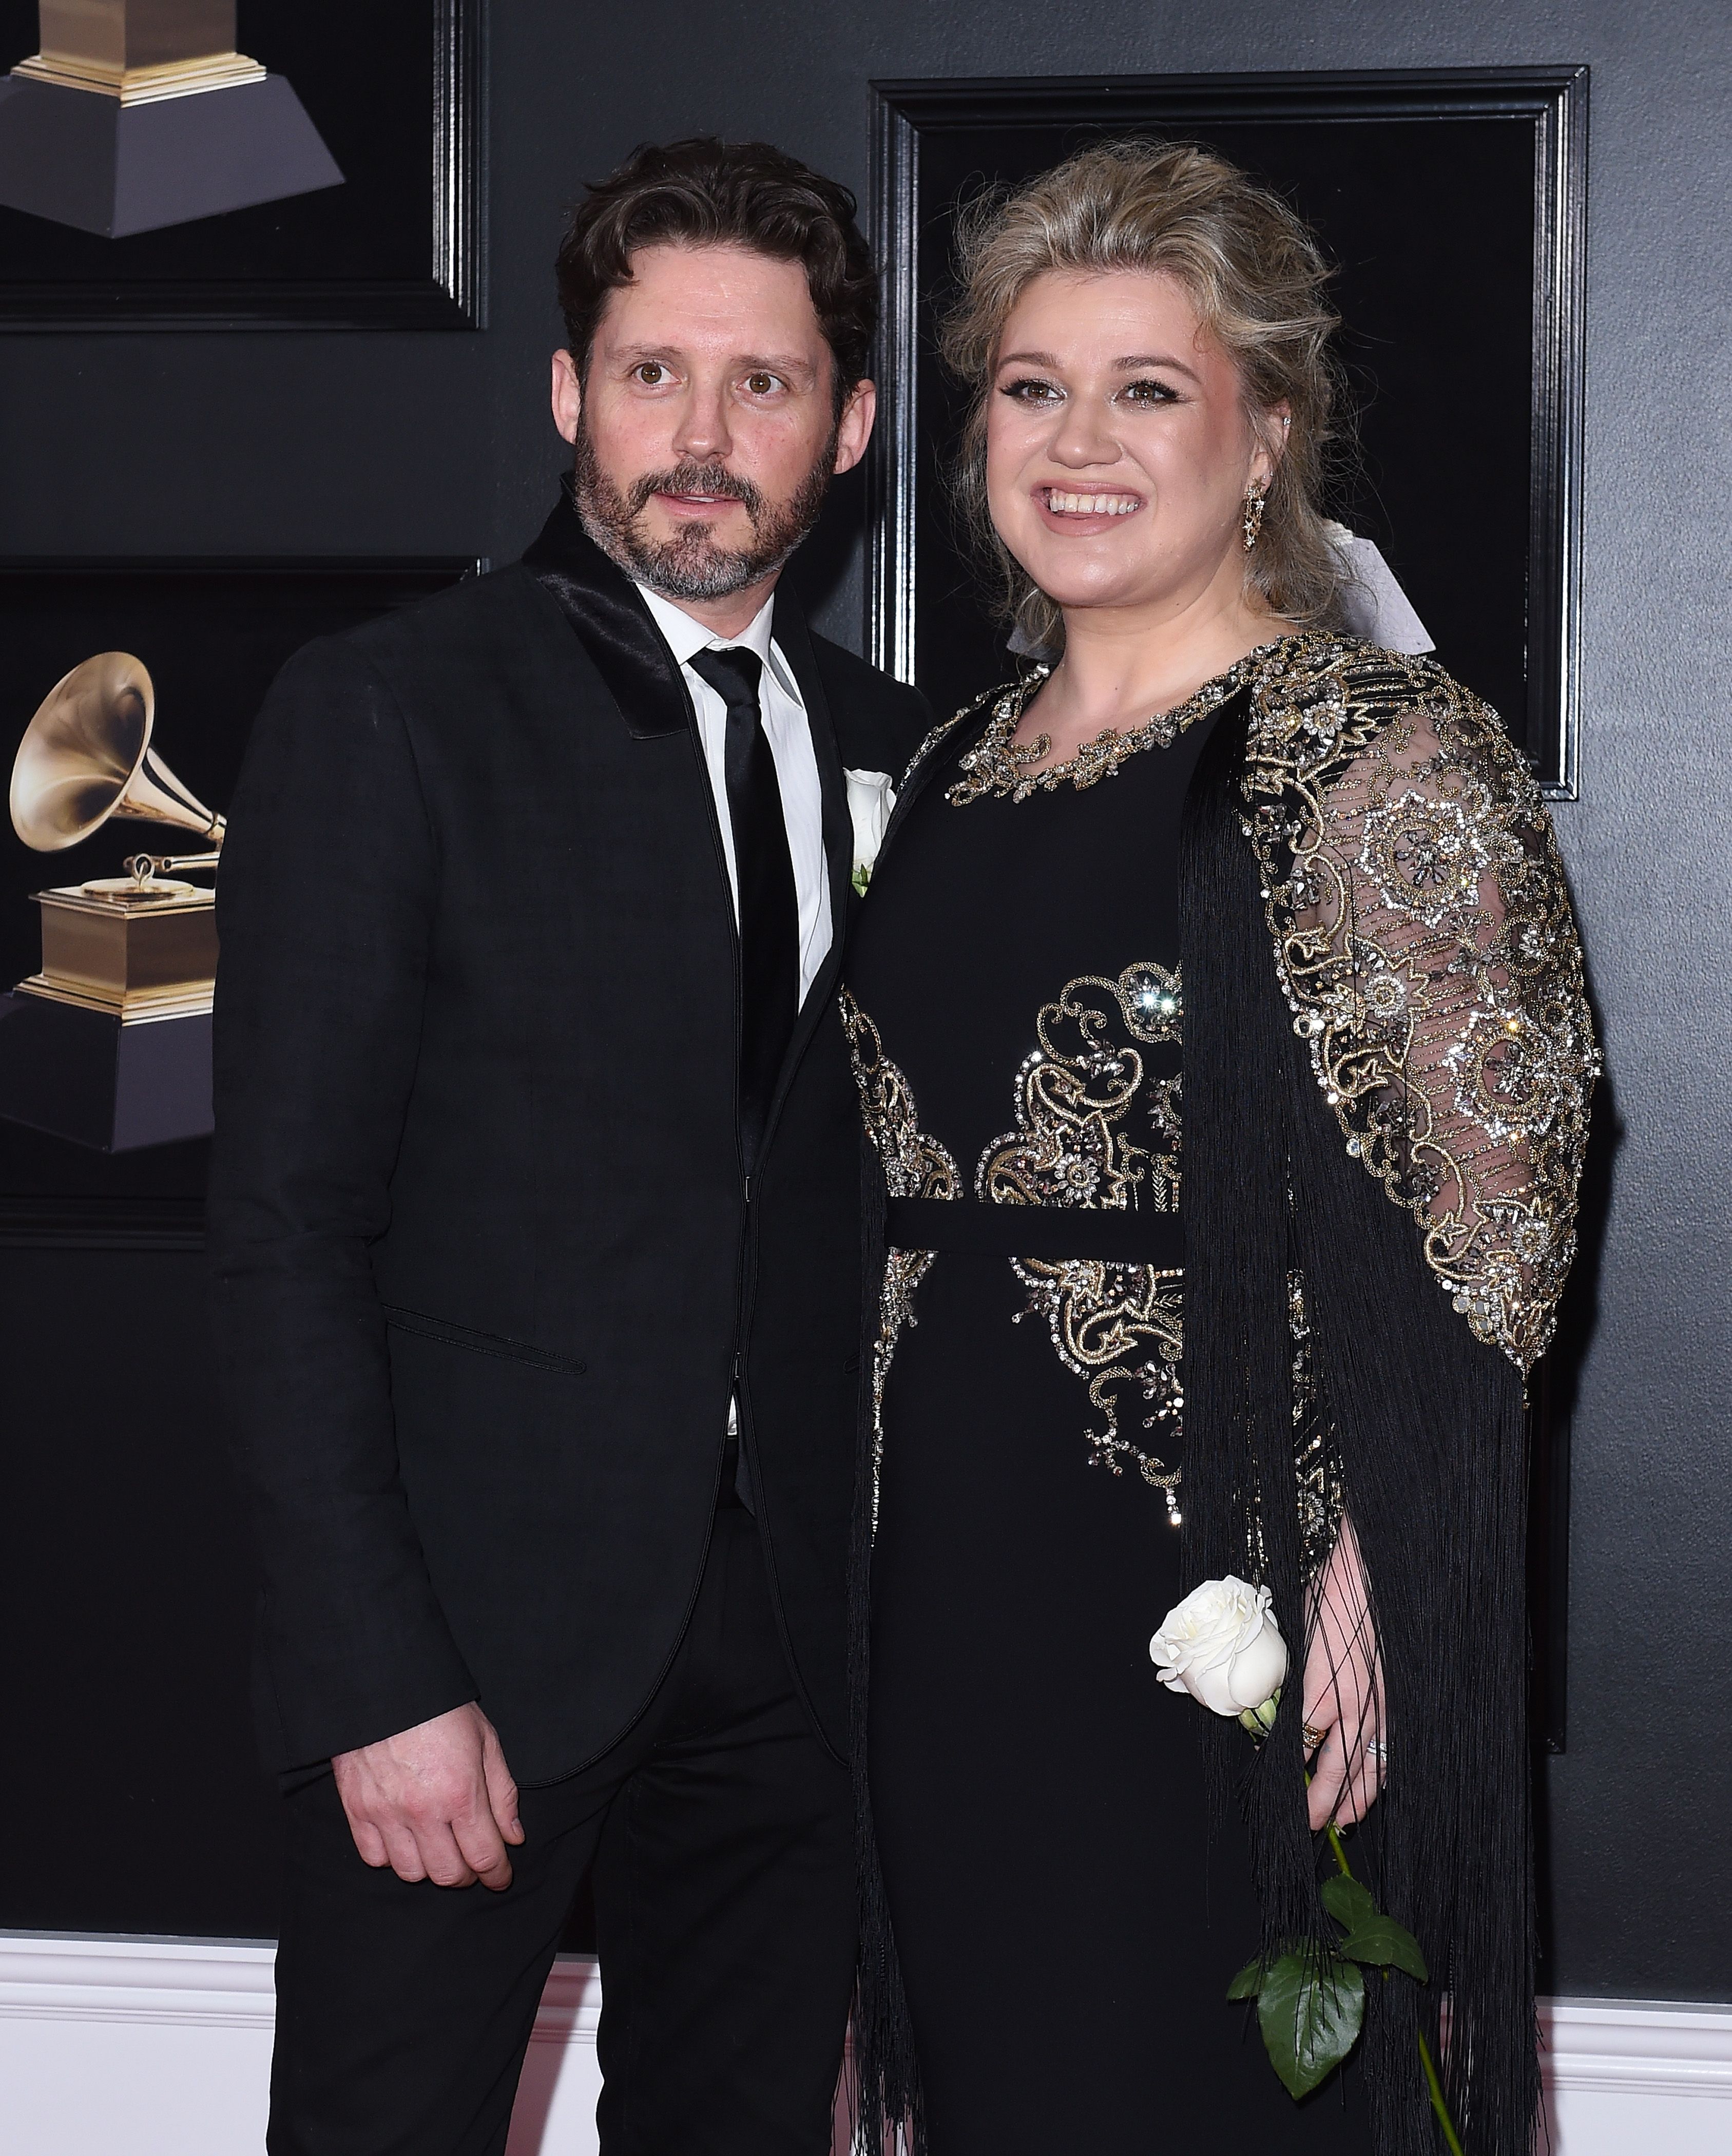 Recording artist Kelly Clarkson and Brandon Blackstock at the 60th Annual GRAMMY Awards at Madison Square Garden on January 28, 2018 | Photo: Getty Images